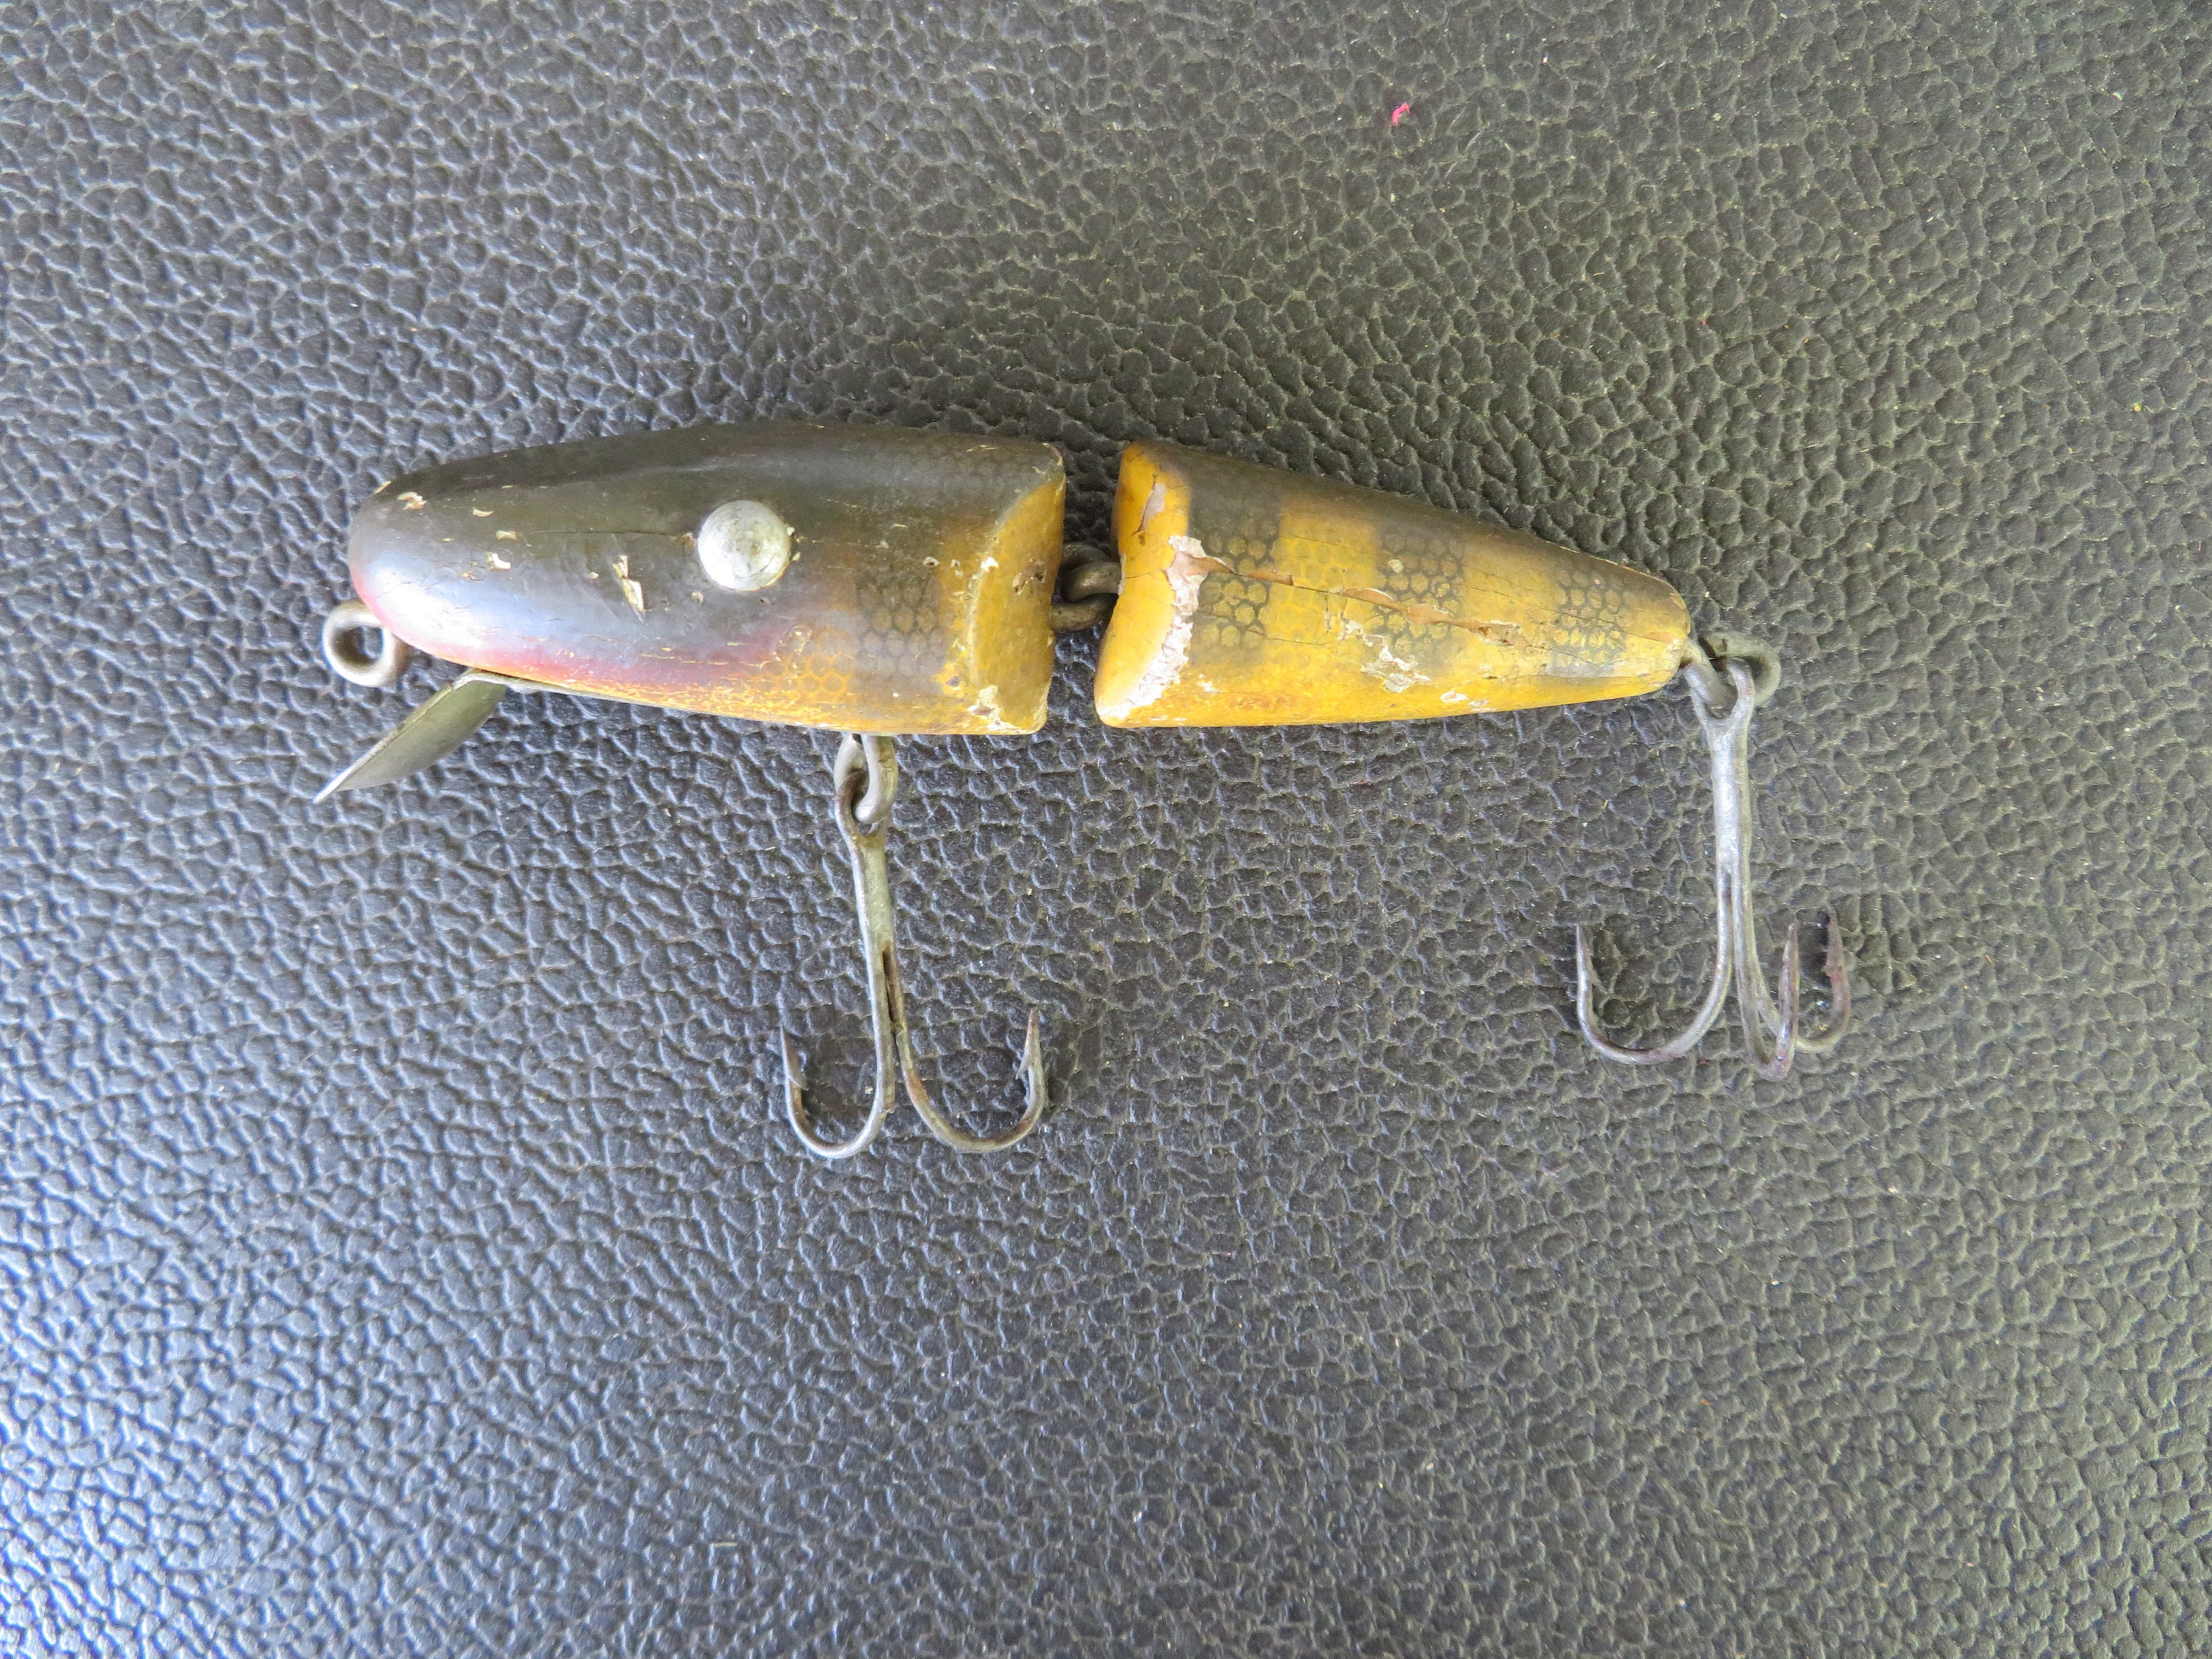 Wood Jointed Paw Paw Tack Eyed Pike Lure 1940's -  Canada